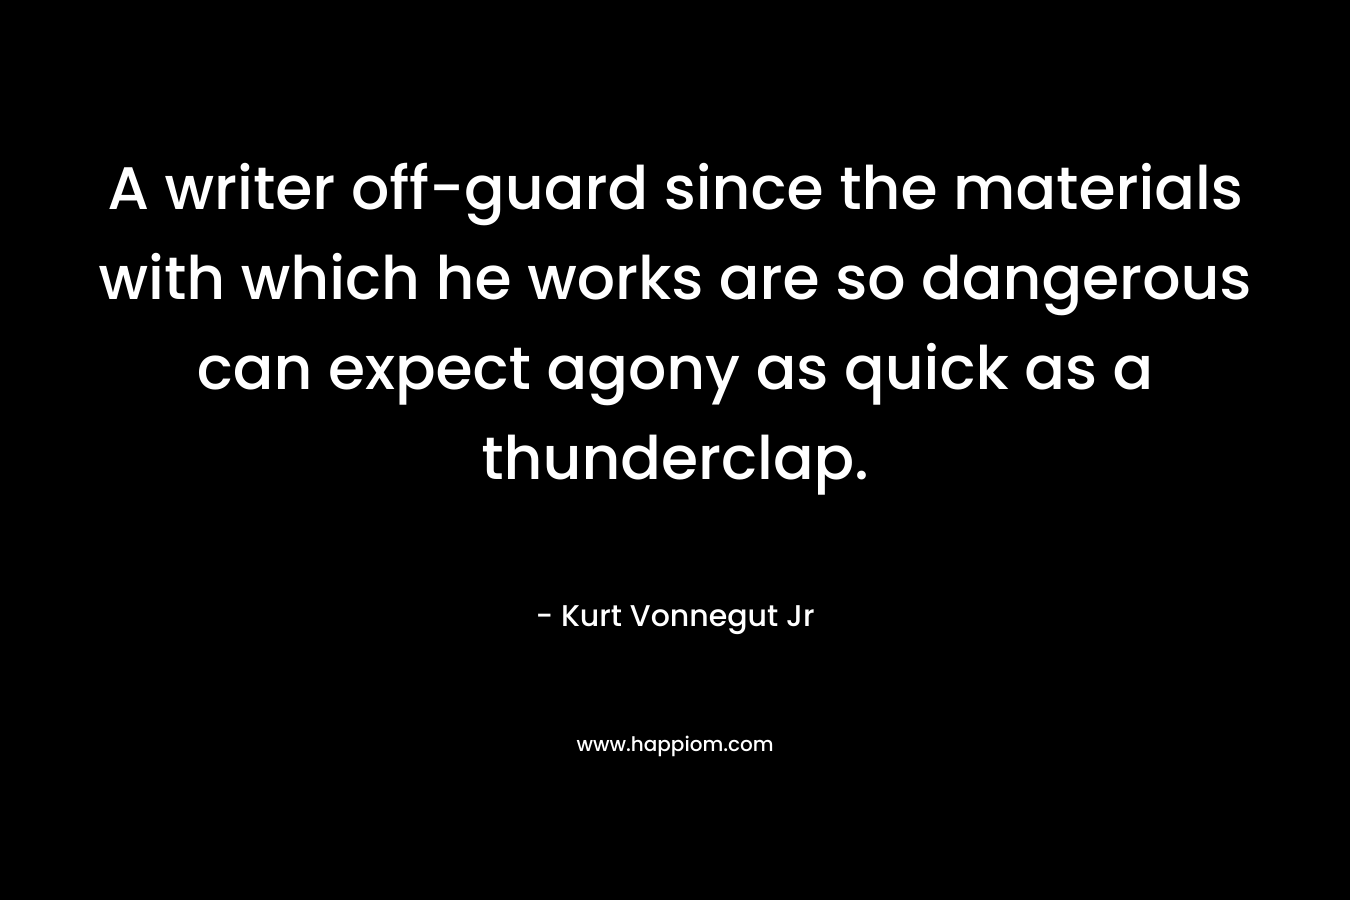 A writer off-guard since the materials with which he works are so dangerous can expect agony as quick as a thunderclap.